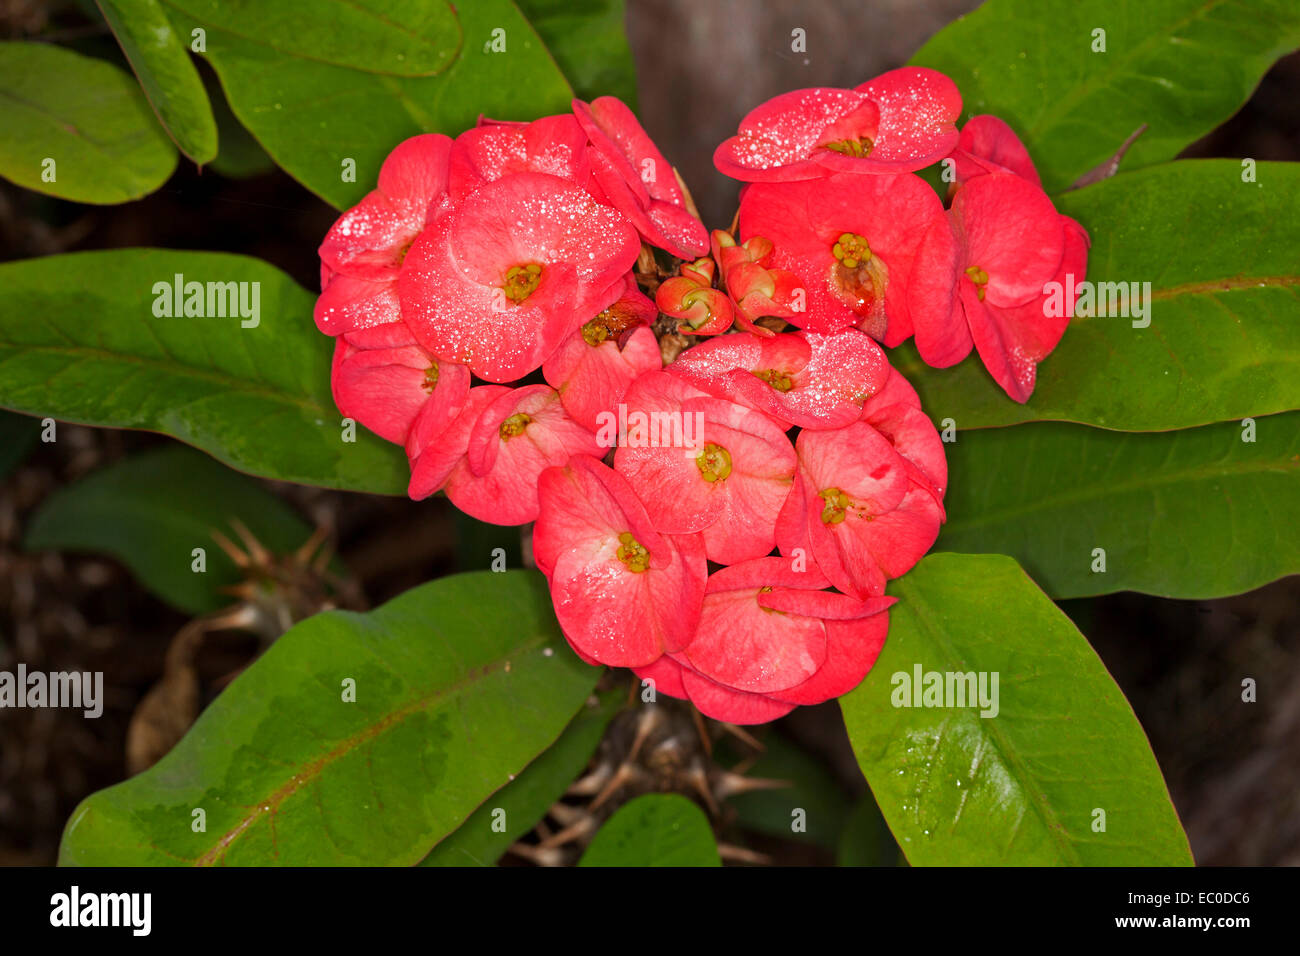 Cluster of large red flowers with dew & emerald leaves of succulent  plant, Euphorbia millii Rancho series, 'Crown of Thorns' Stock Photo